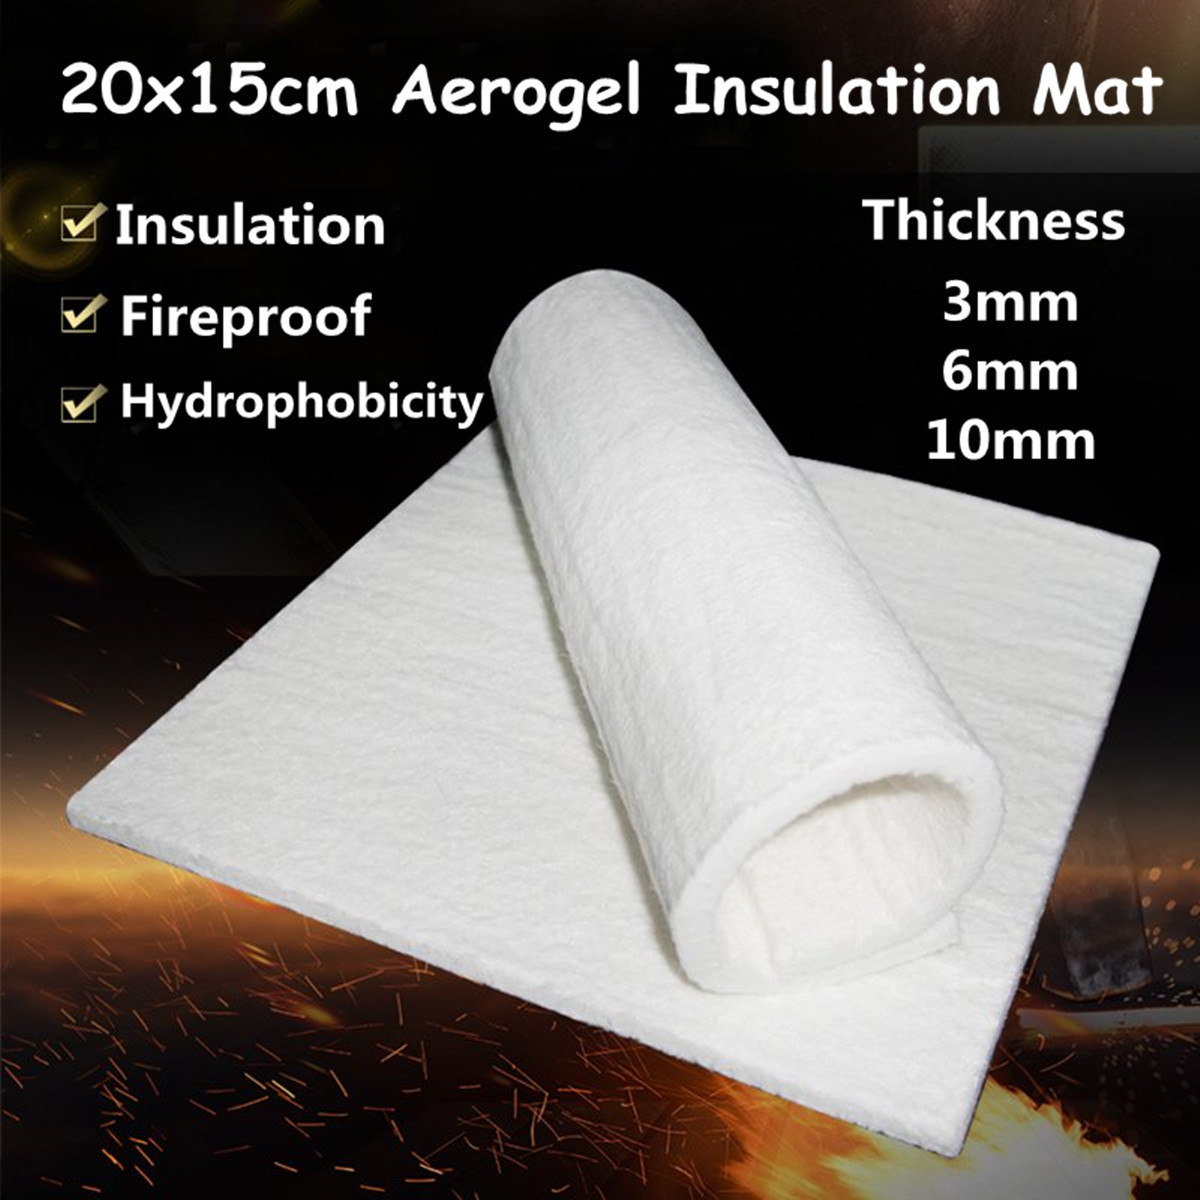 3610mm-Aerogel-Insulation-Hydrophobic-Mat-Foot-Low-to-High-Temp-20x15cm-Water-Pipe-Insulation-Mat-1321399-1